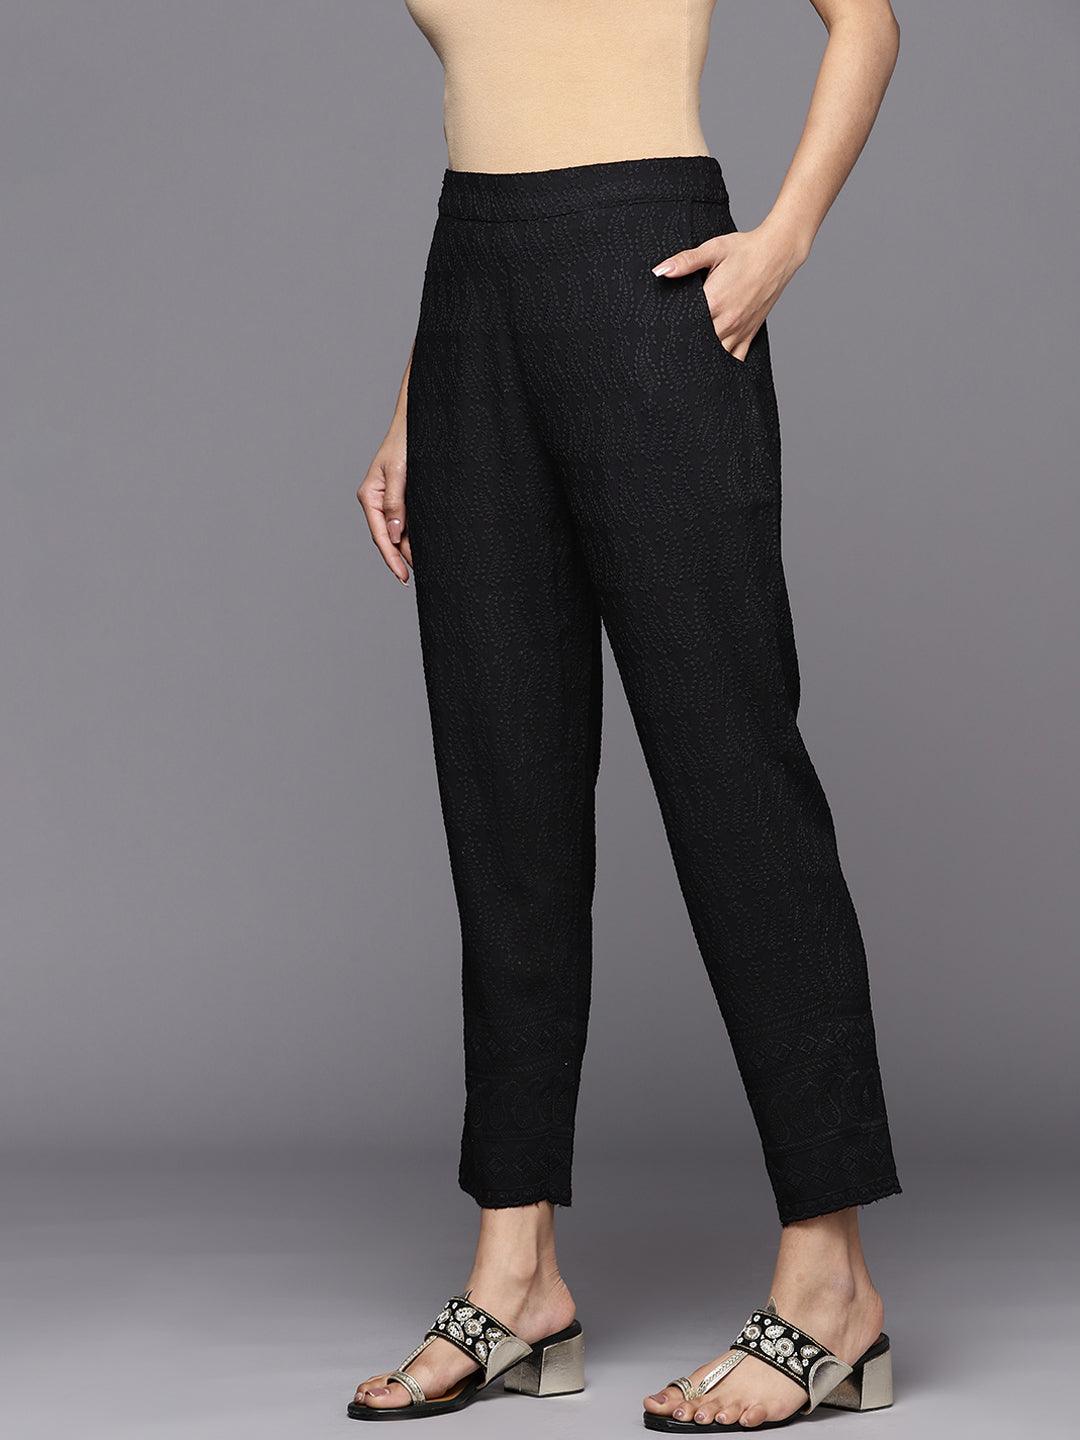 Black Embroidered Viscose Rayon Trousers - Libas